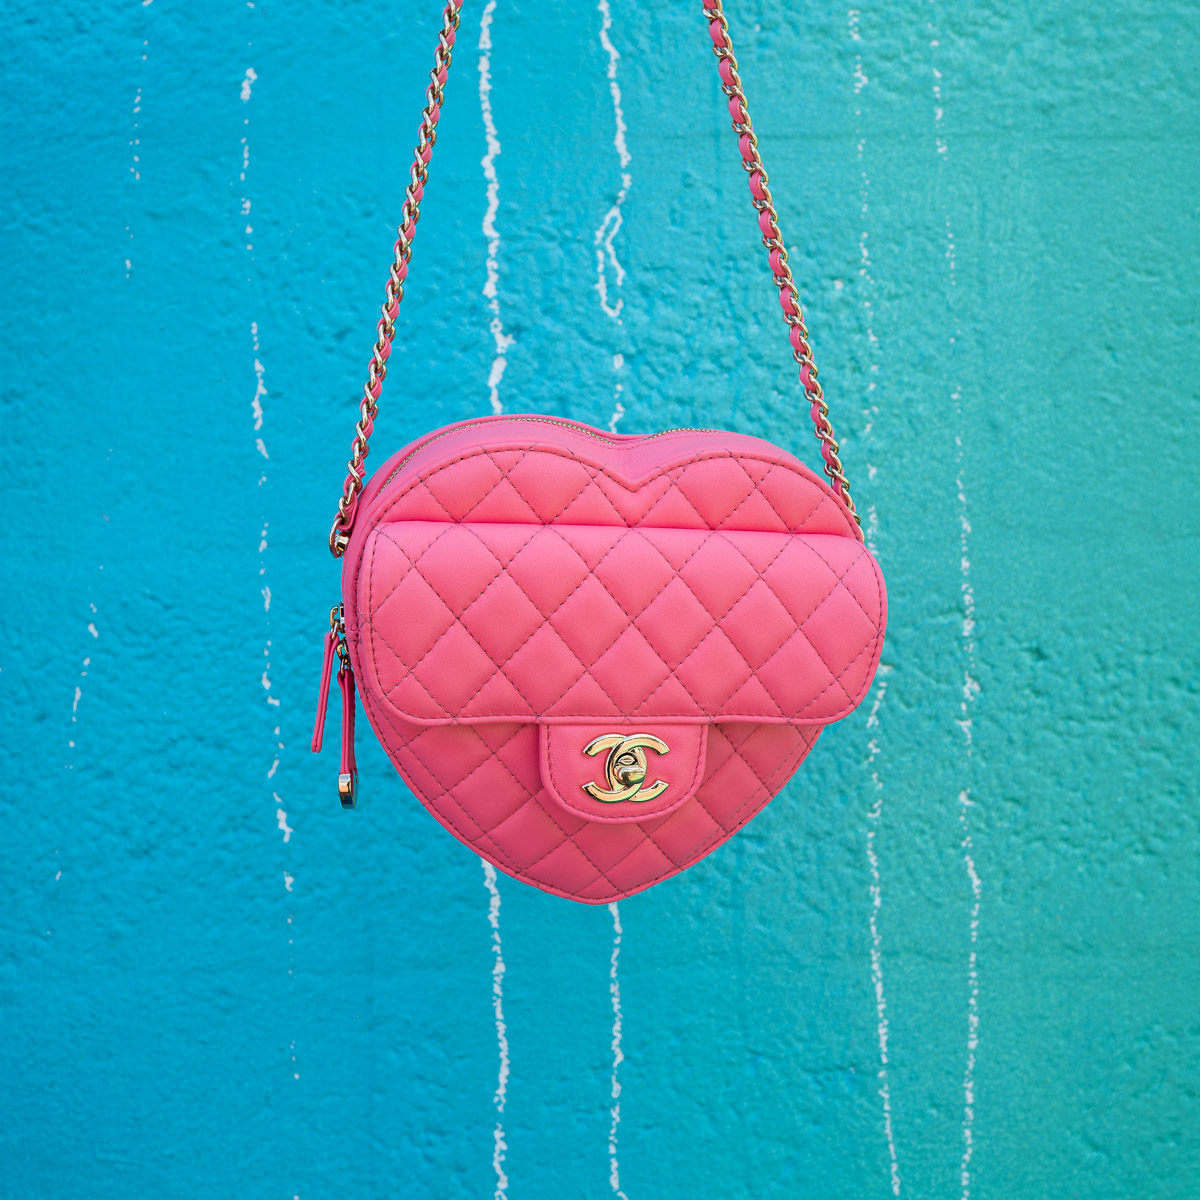 Chanel Pink Quilted Lambskin Love Heart Bag